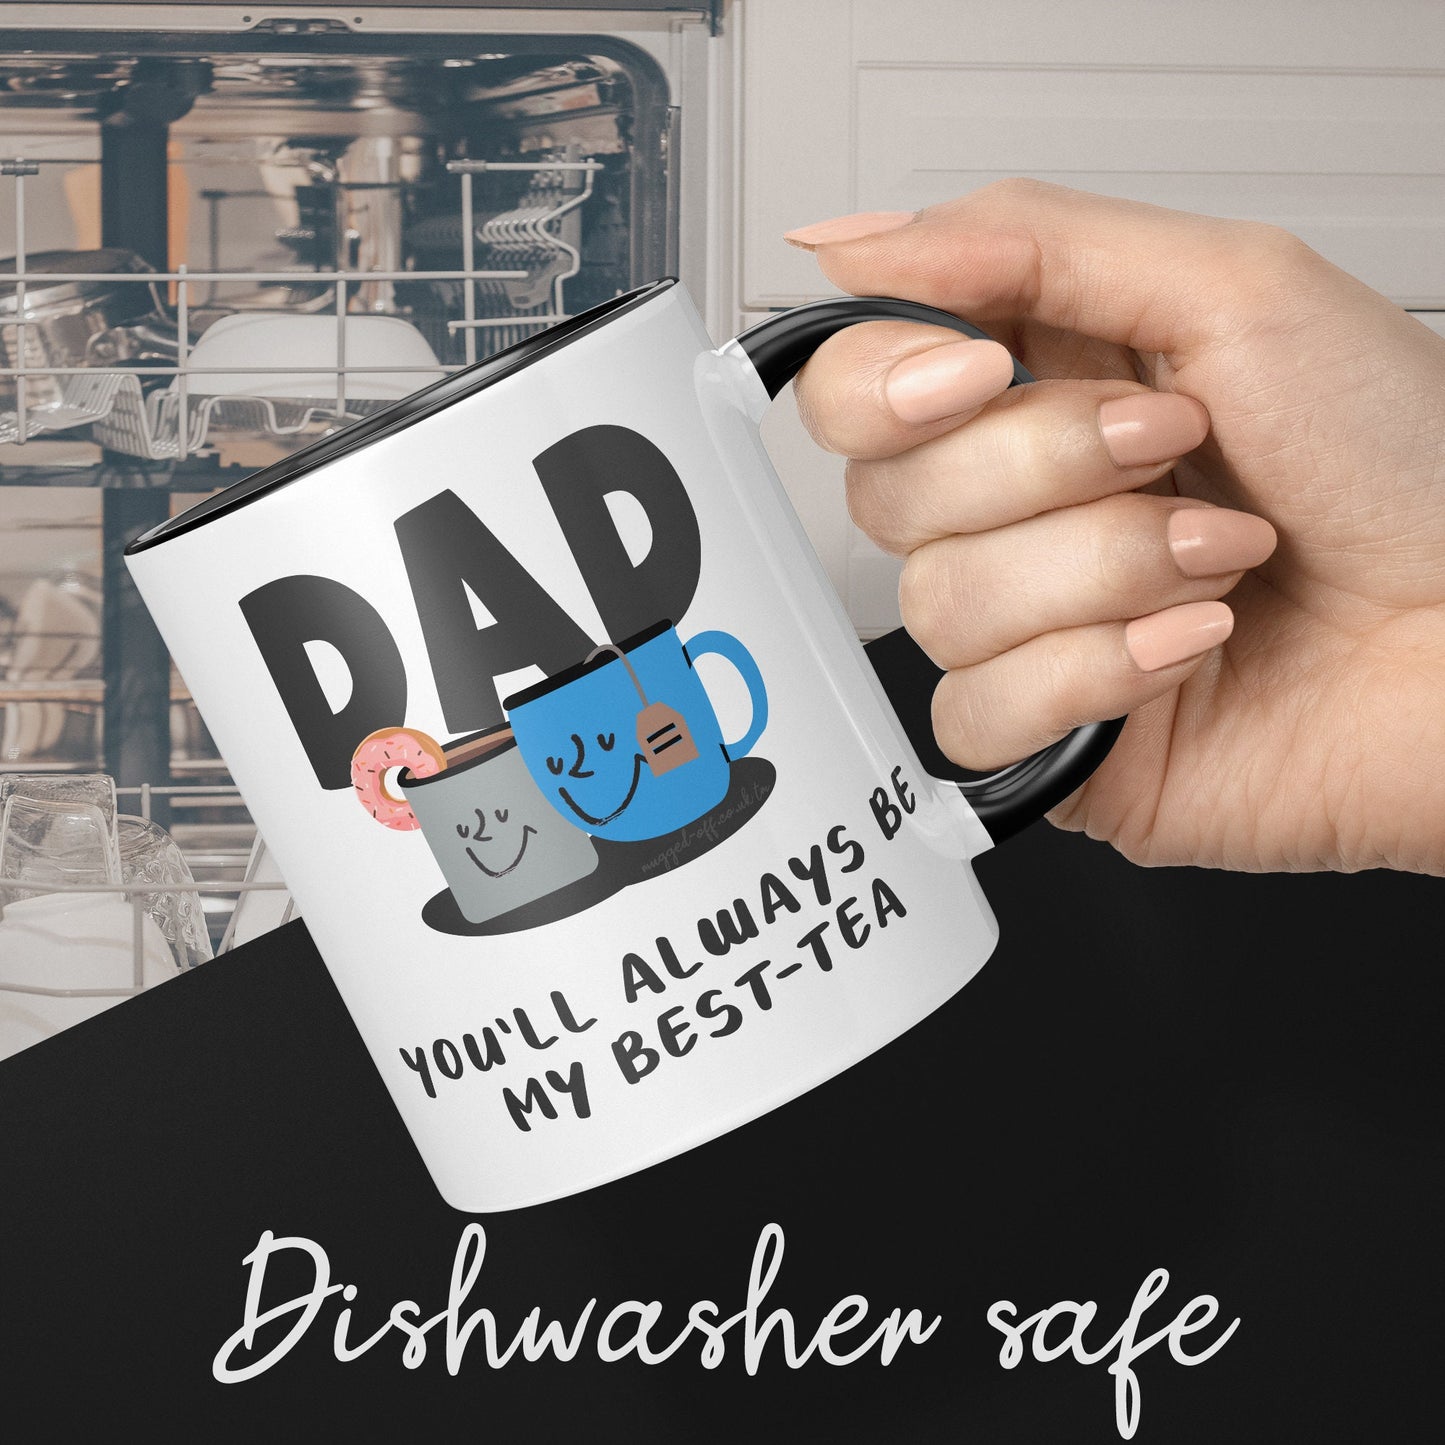 Dad Mug, Funny Dad Gifts, From Son, Daughter, Funny Best Dad Mug, Daddy You'll Always Be My Best-tea